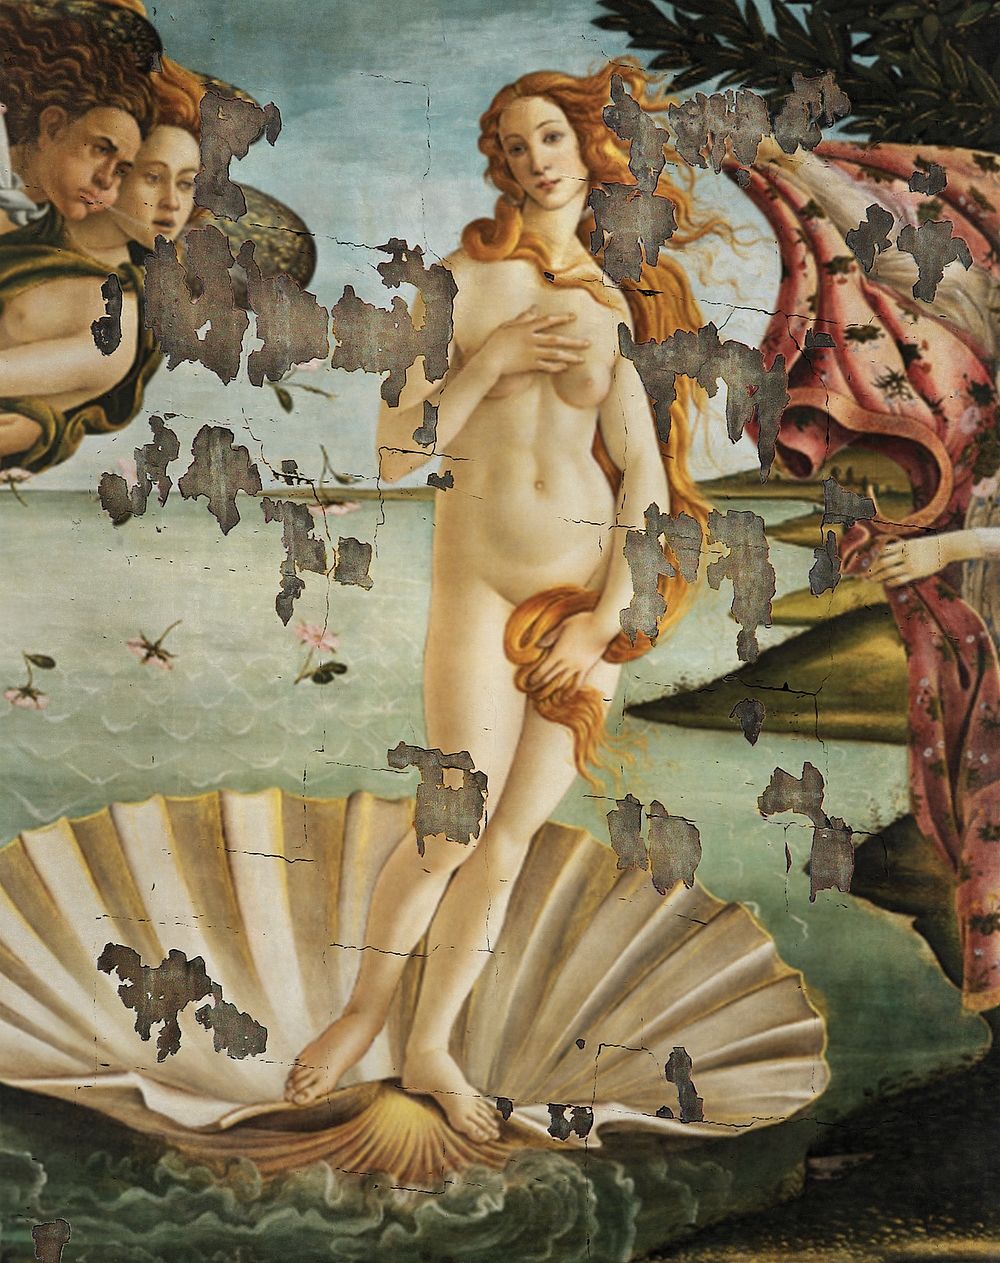 Weathered Sandro Botticelli's The Birth of Venus painting. Remixed by rawpixel.